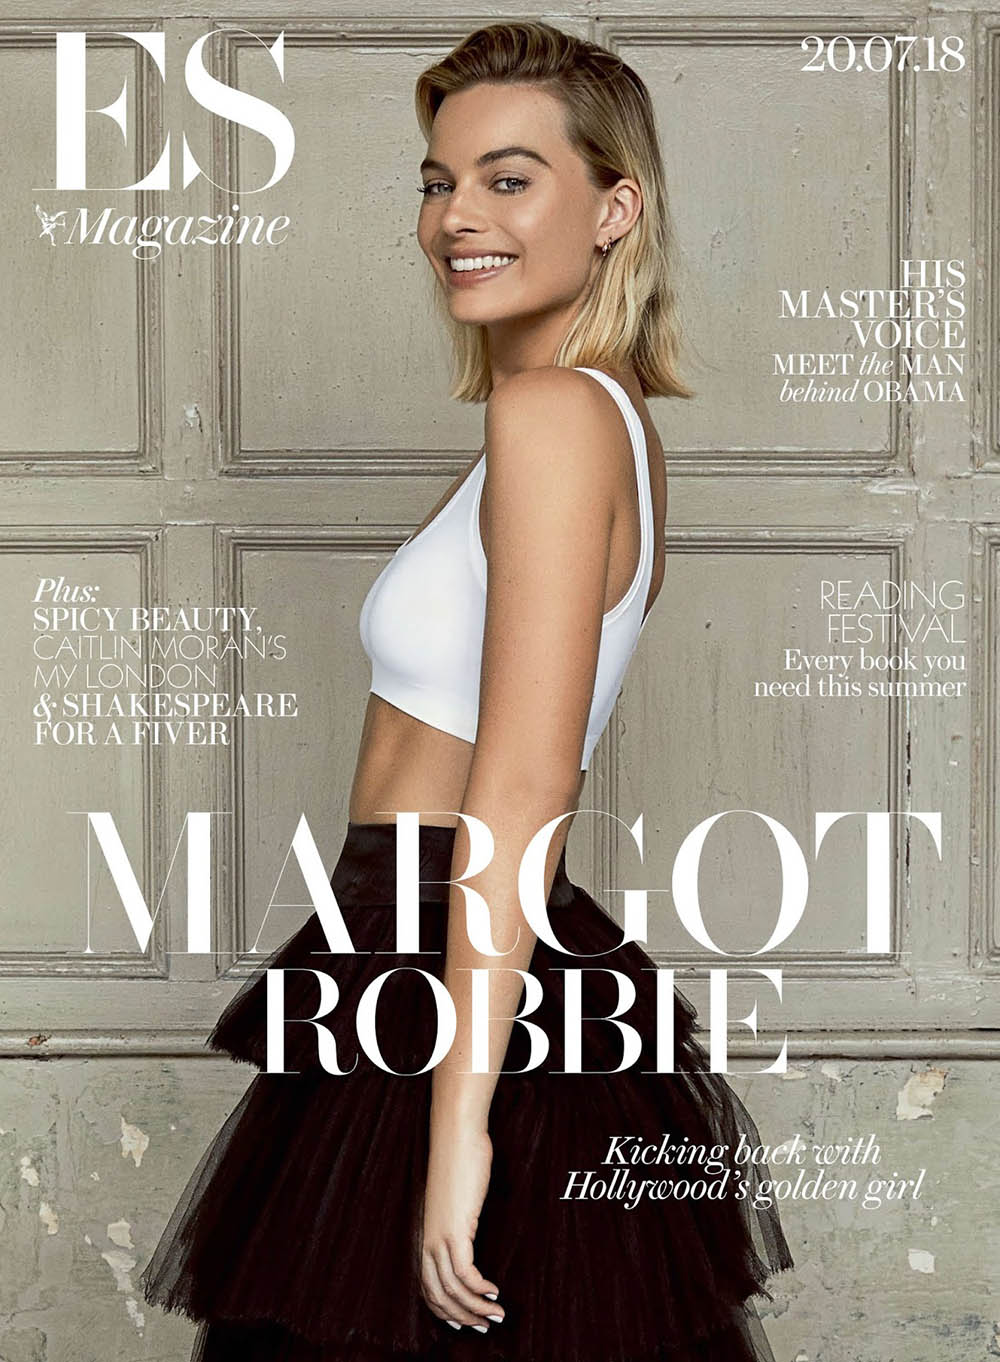 Margot Robbie covers ES Magazine July 20th, 2018 by Max Papendieck